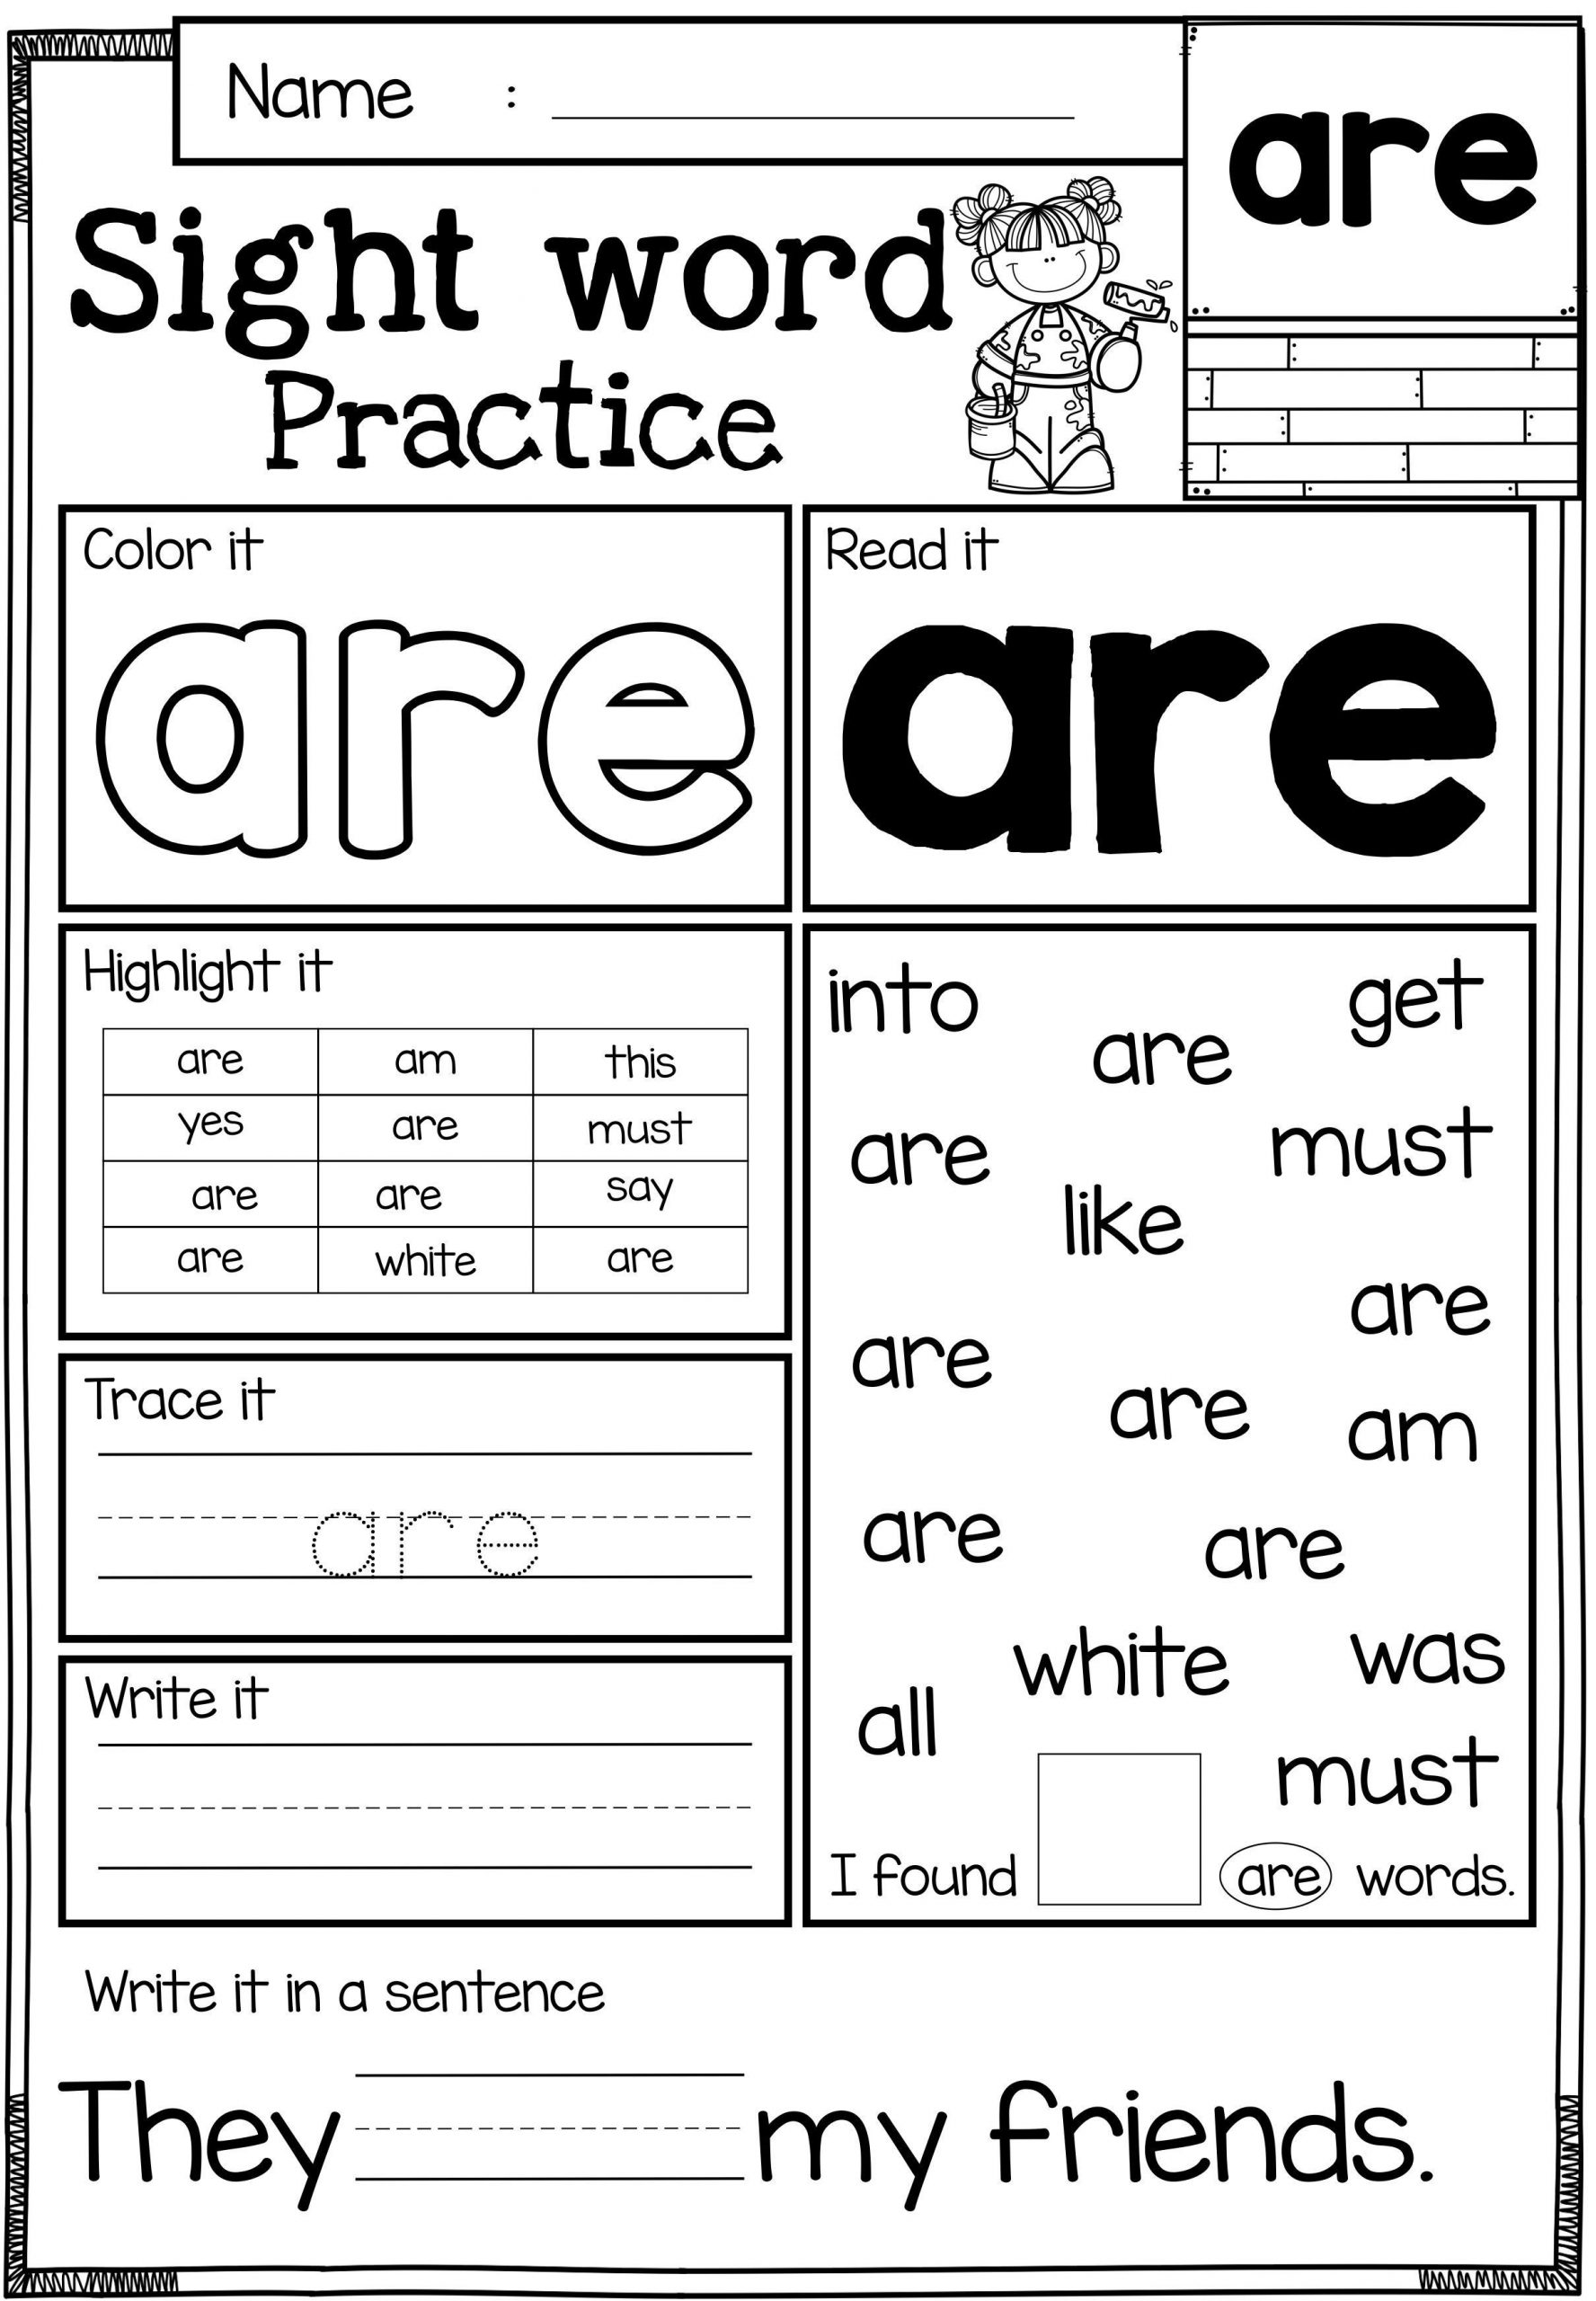 90 Sight Word Practice Worksheets 73